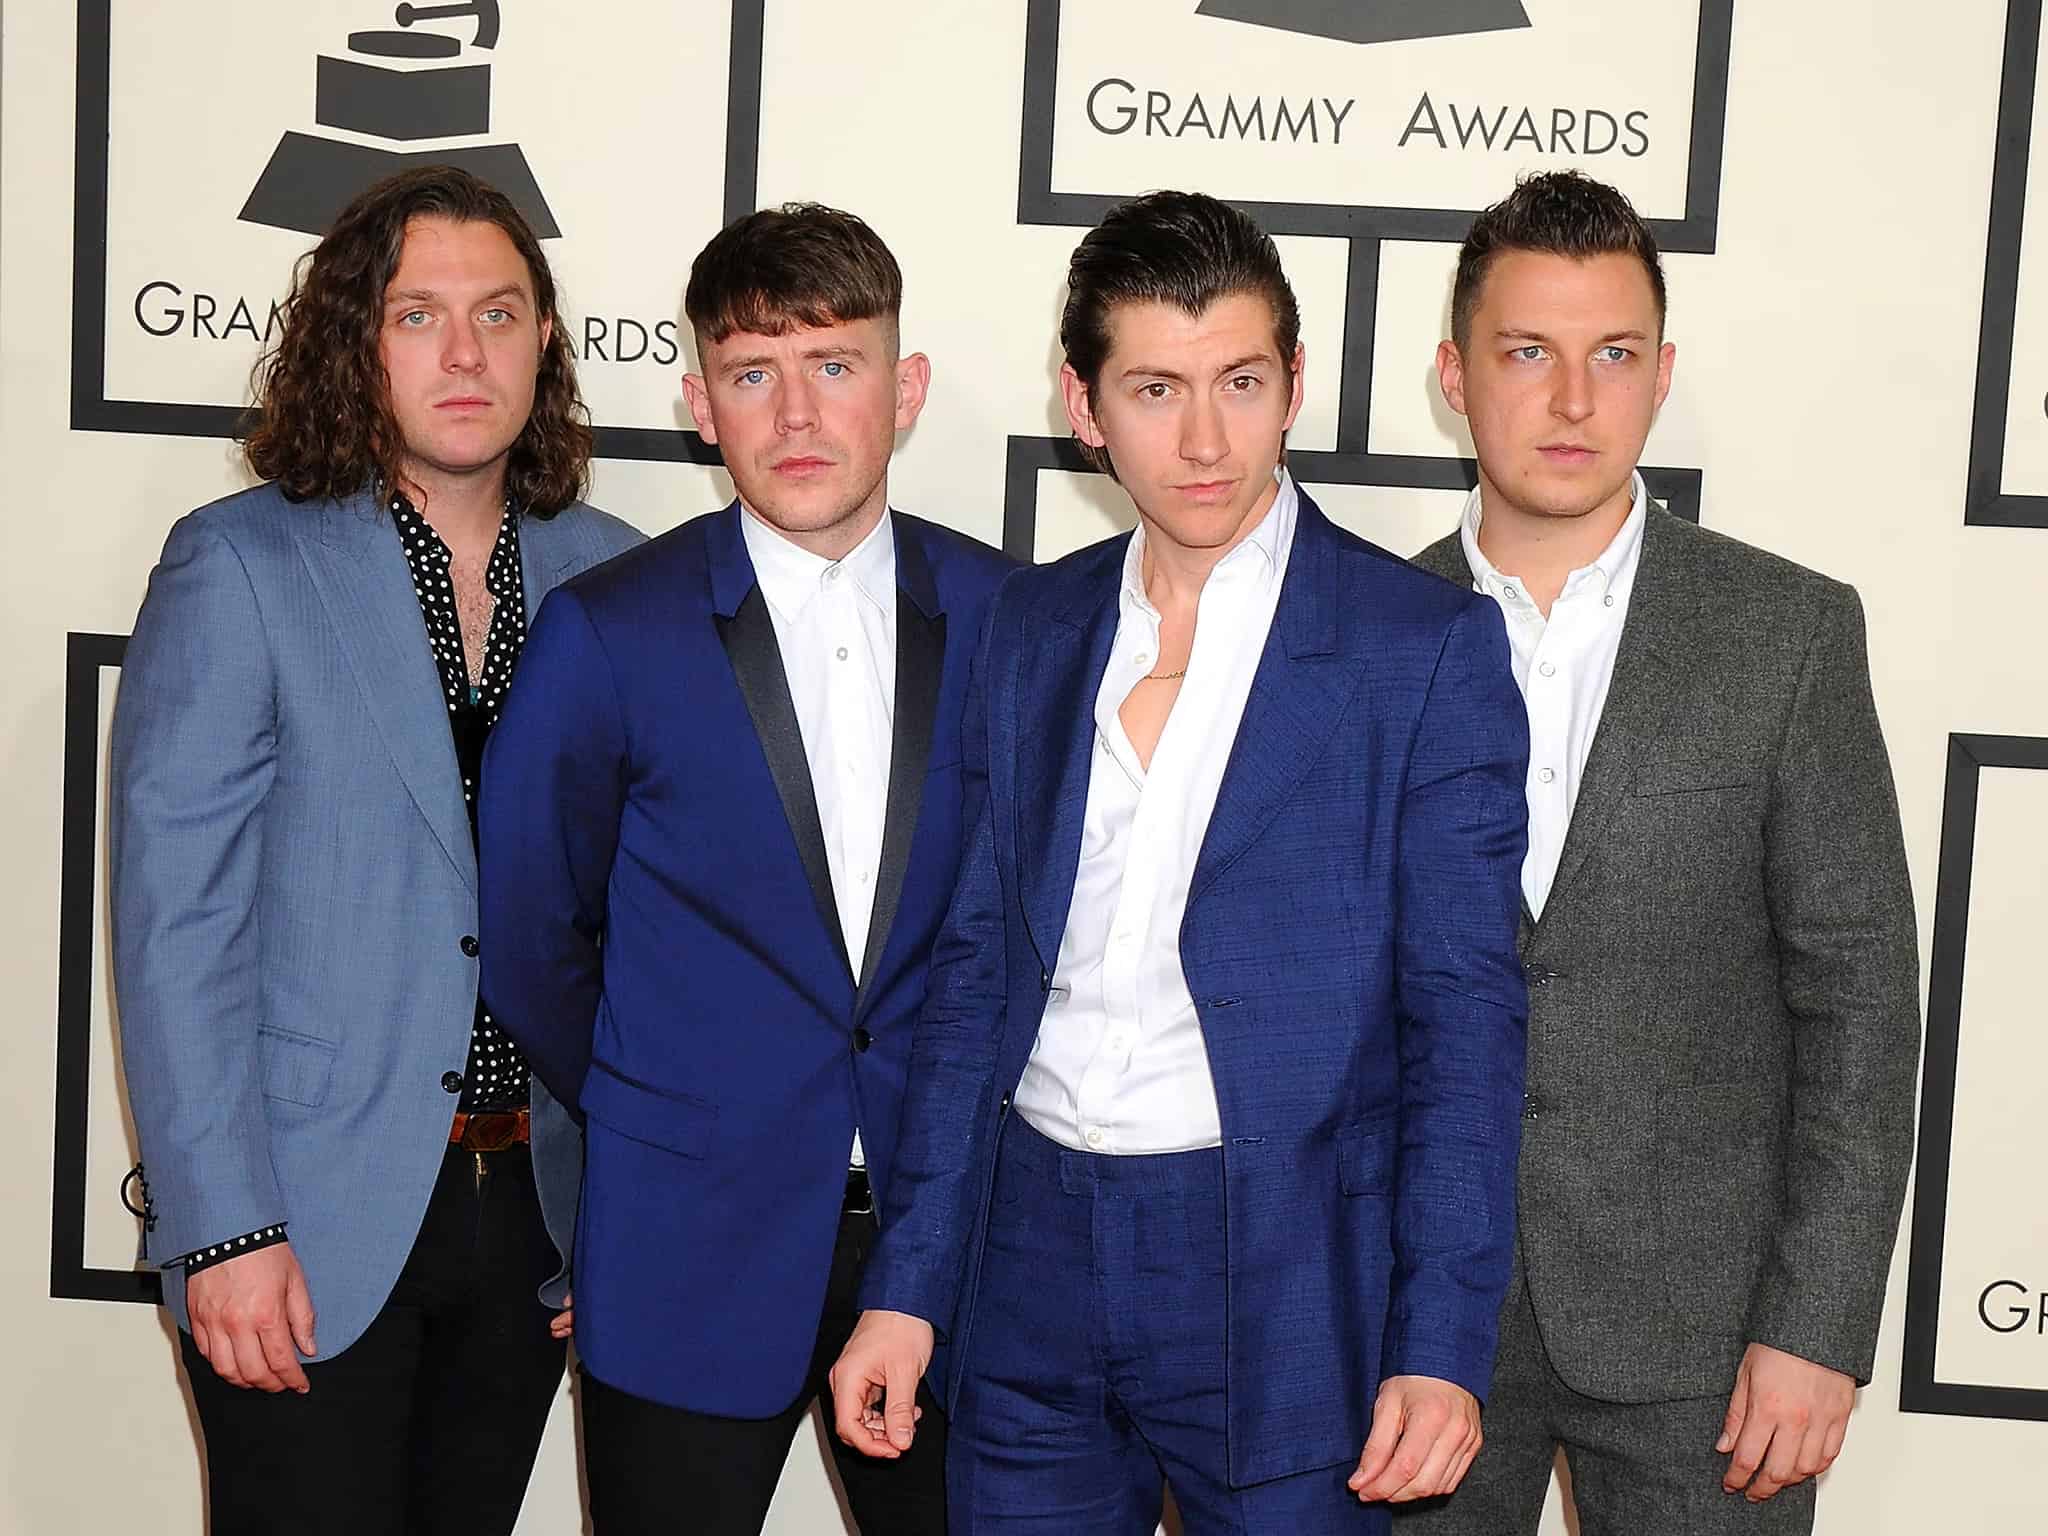 The band at the Grammy Awards